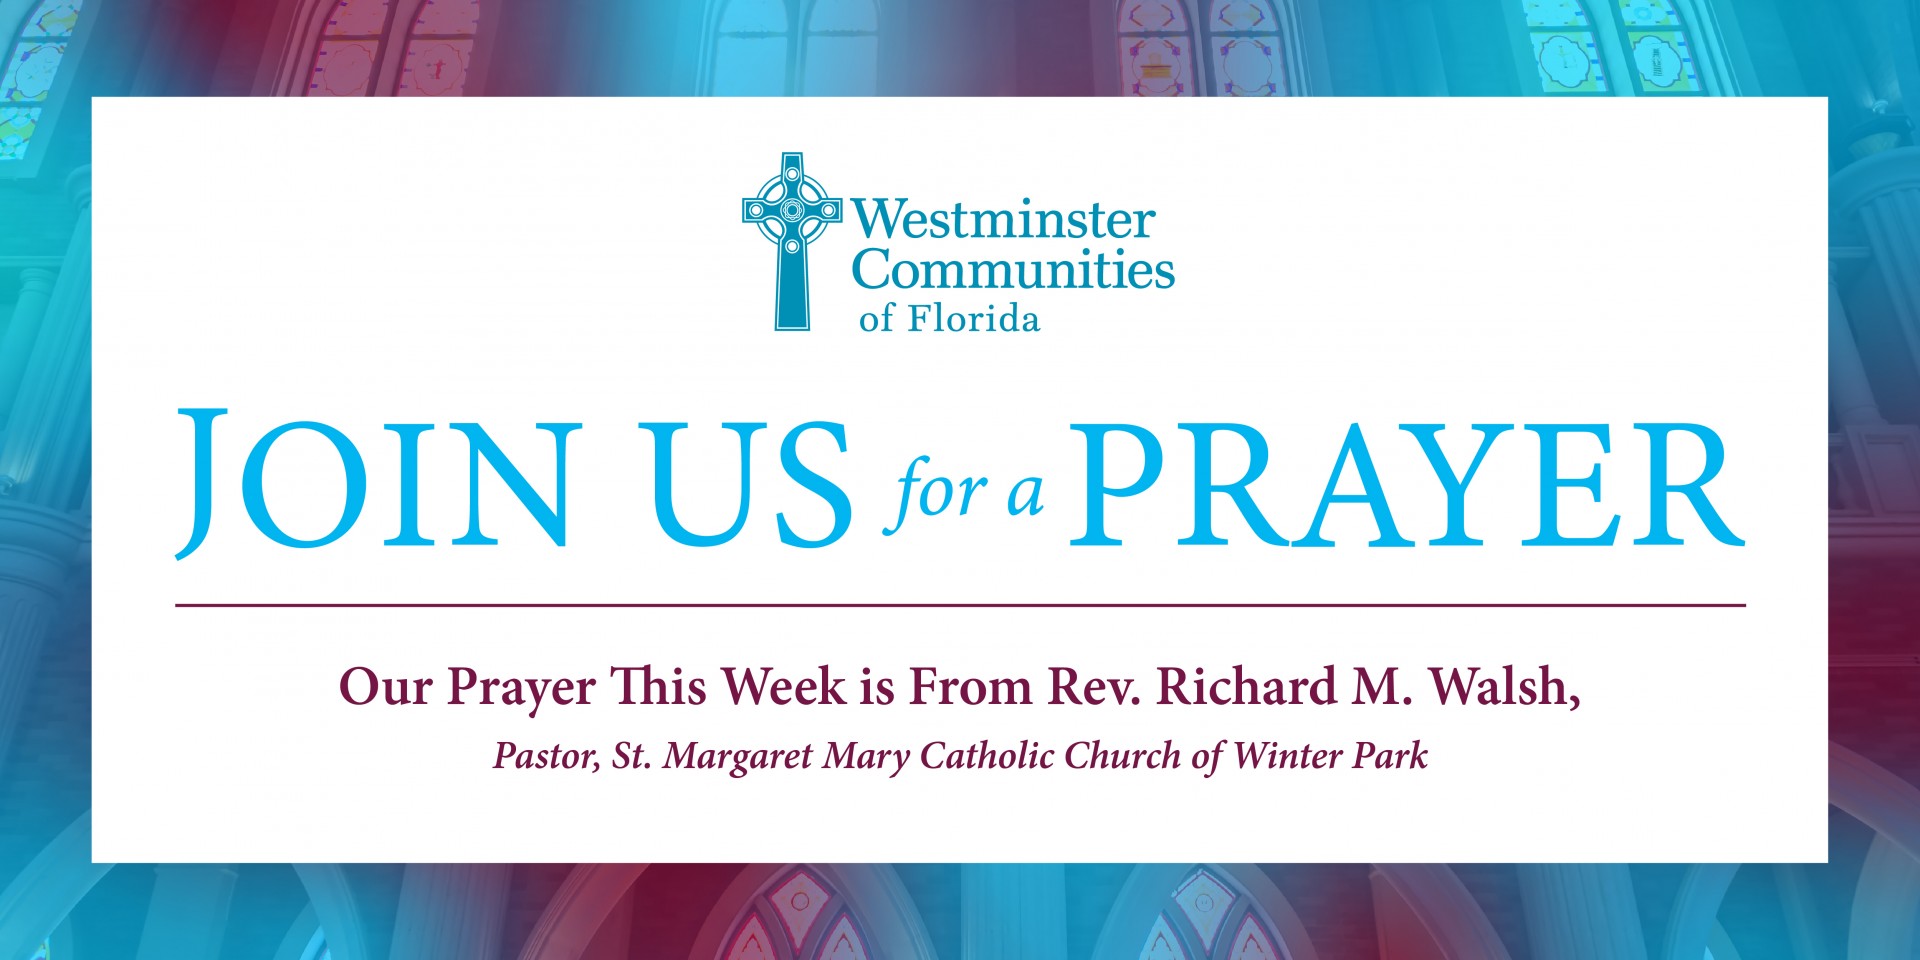 Join Us In A Shared Prayer Today at 2 p.m.